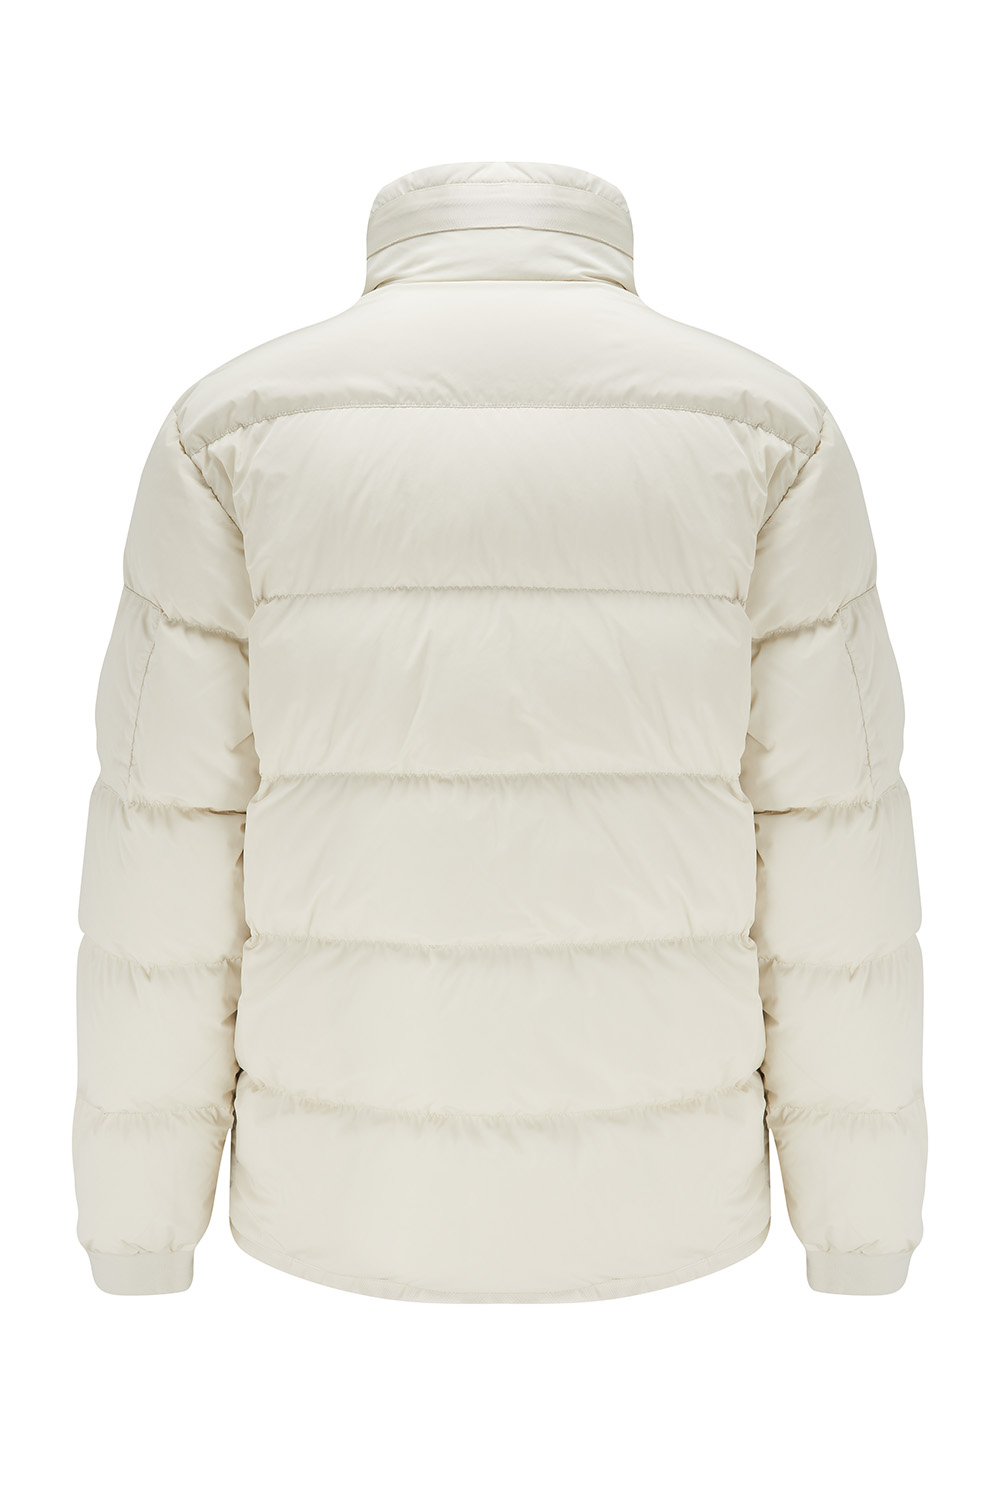 C.P. Company Nycra-R Men’s Puffer Jacket White - New W21 Collection